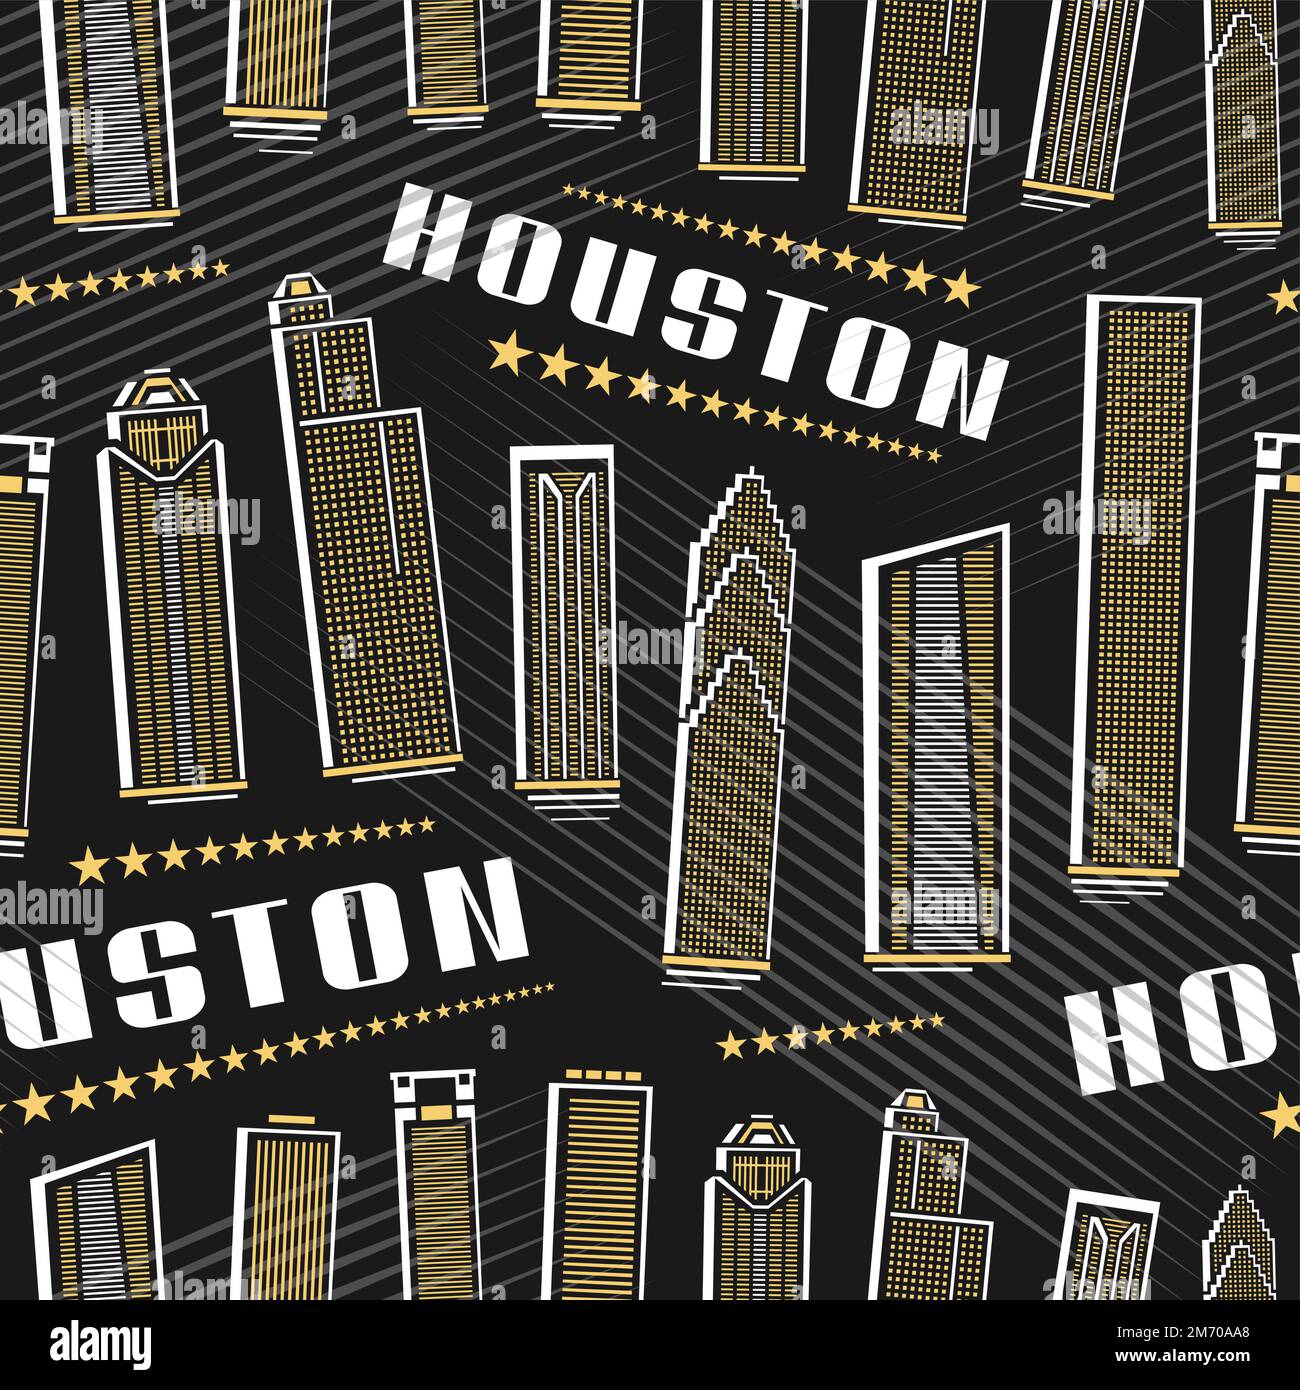 Downtown Houston Wall Mural  Murals Your Way